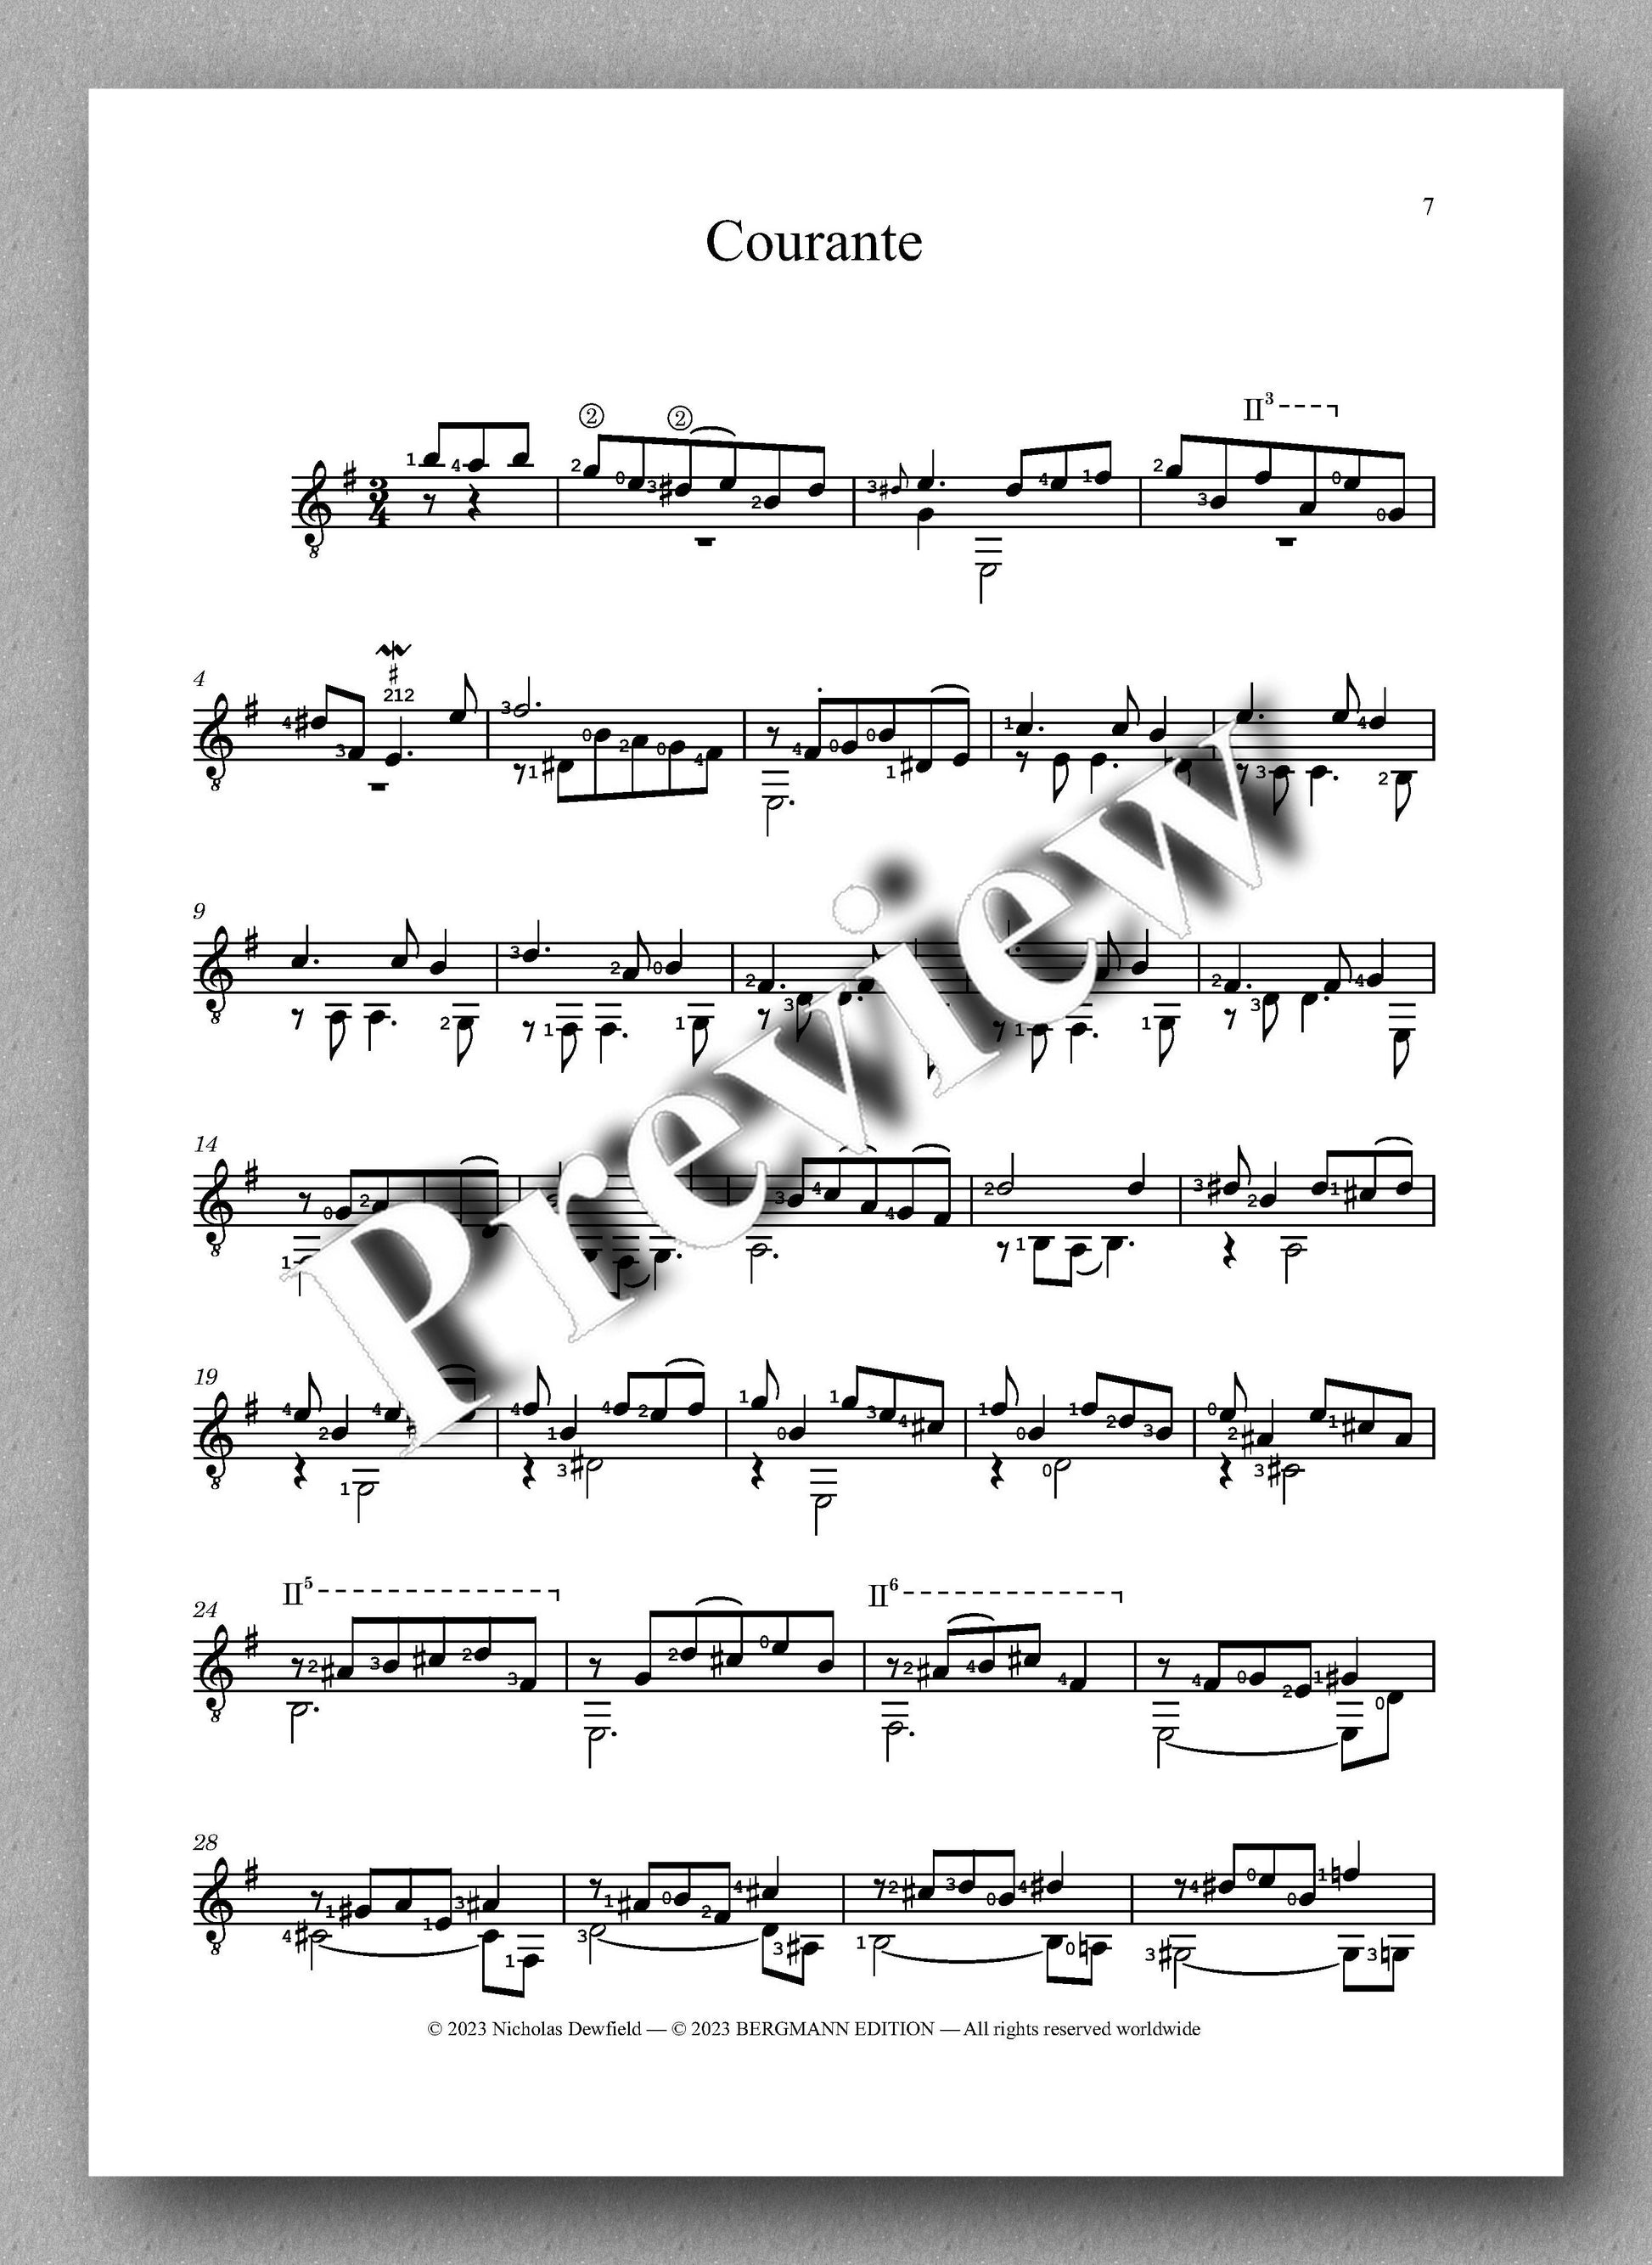 Sylvius Leopold Weiss (1687-1750), Sonata No. 21 - preview of the music score 2